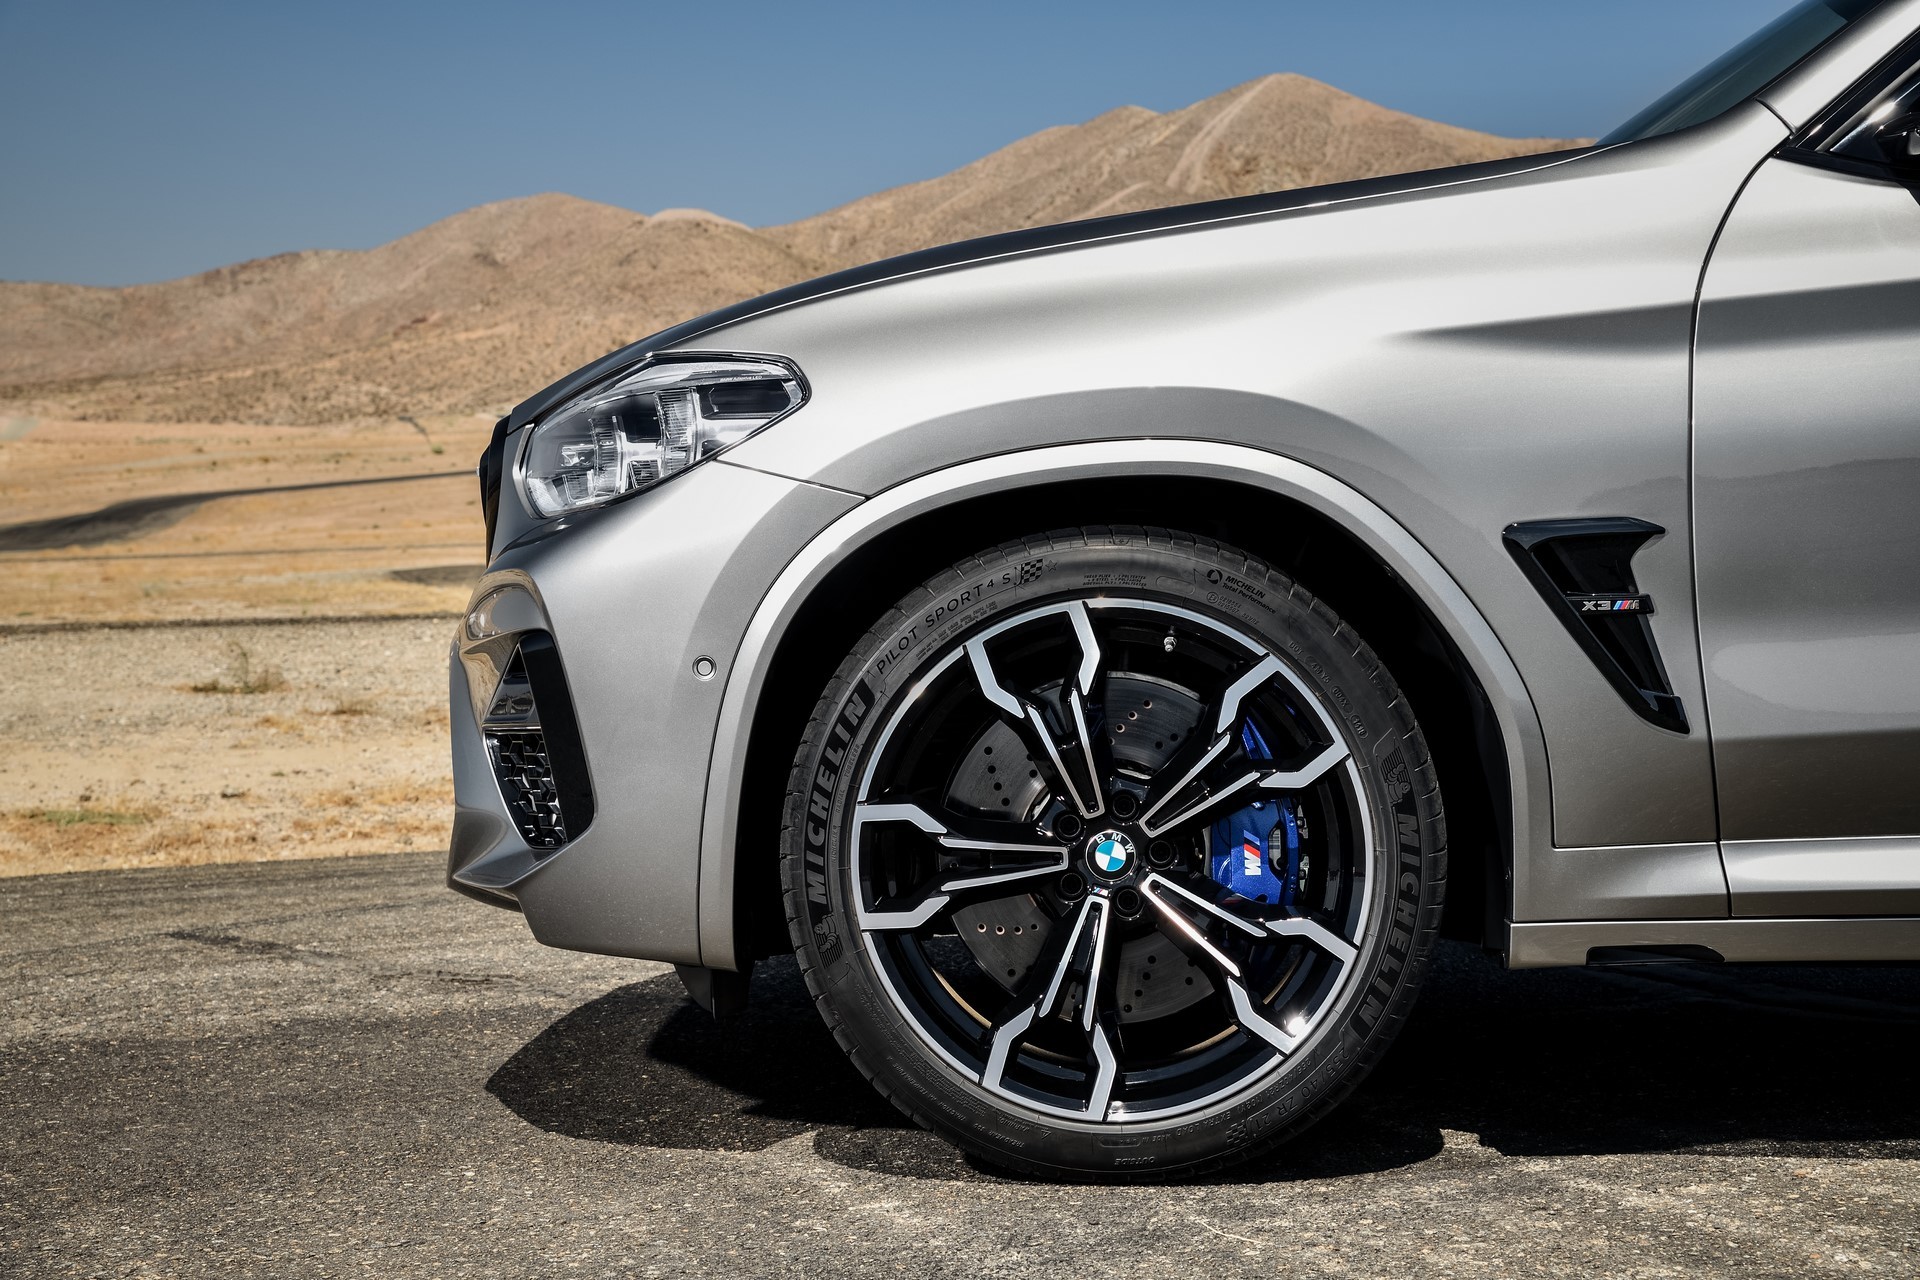 BMW X3 M and X4 M 2019 (50)